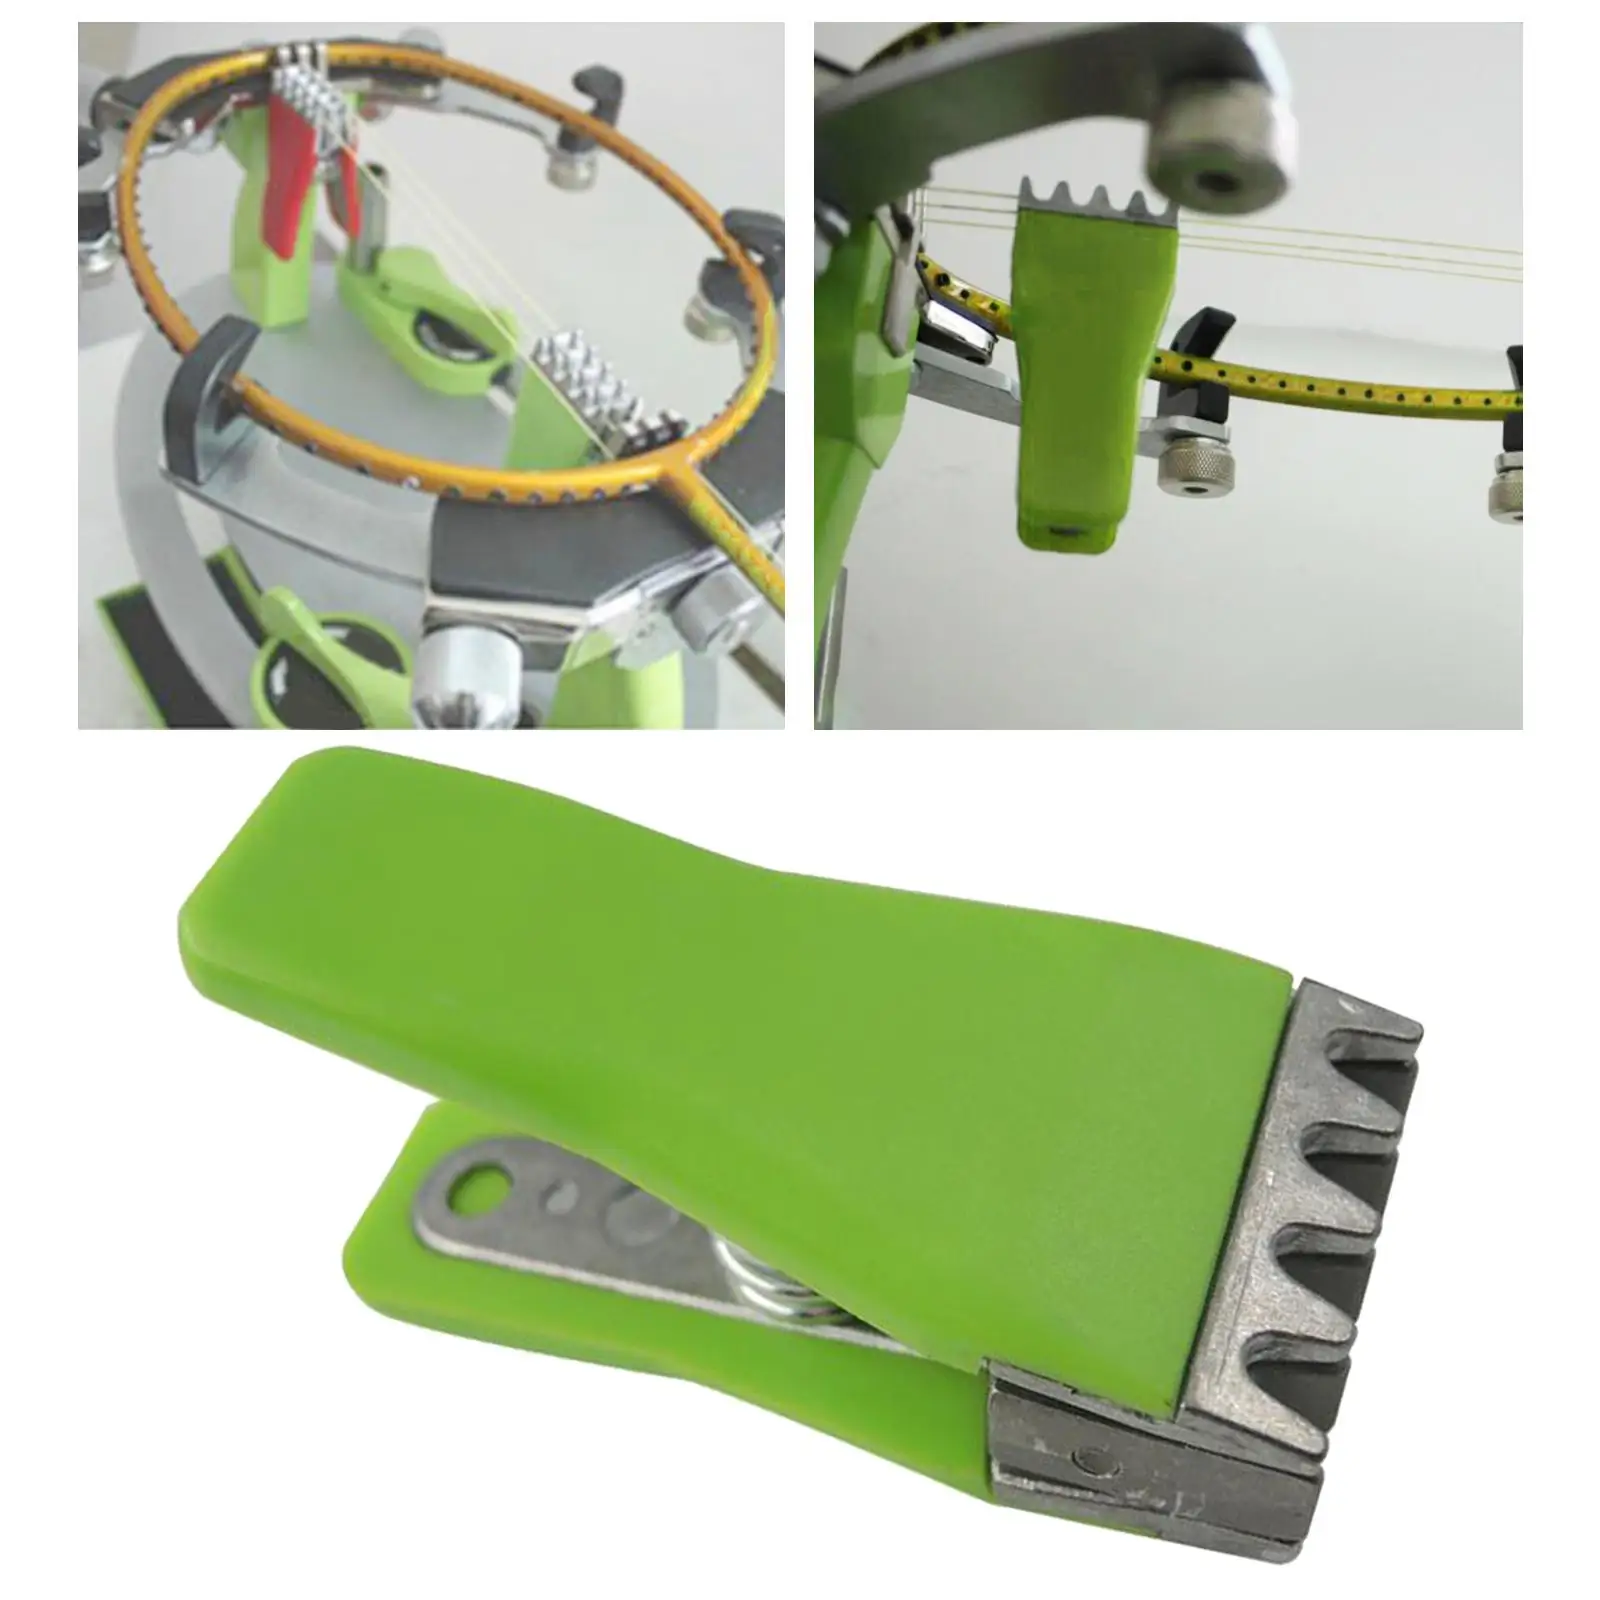 Universal Badminton Flying Clamp, Racket Stringing Machine Tool Gripper Sports Clip Supplies